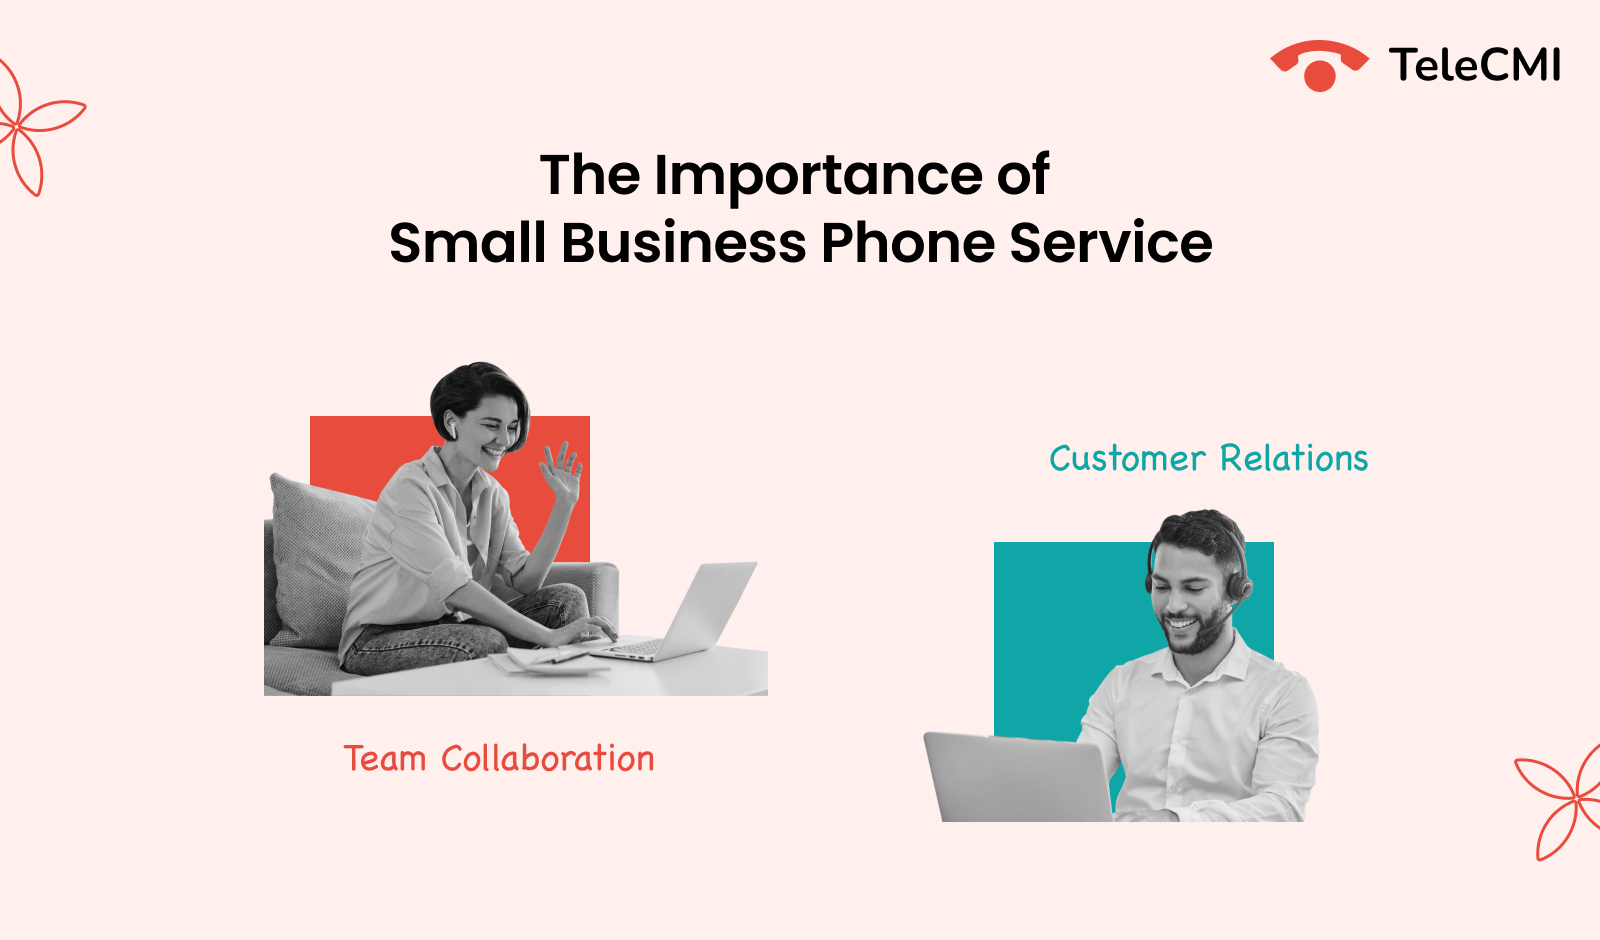 The Importance of Small Business Phone Service